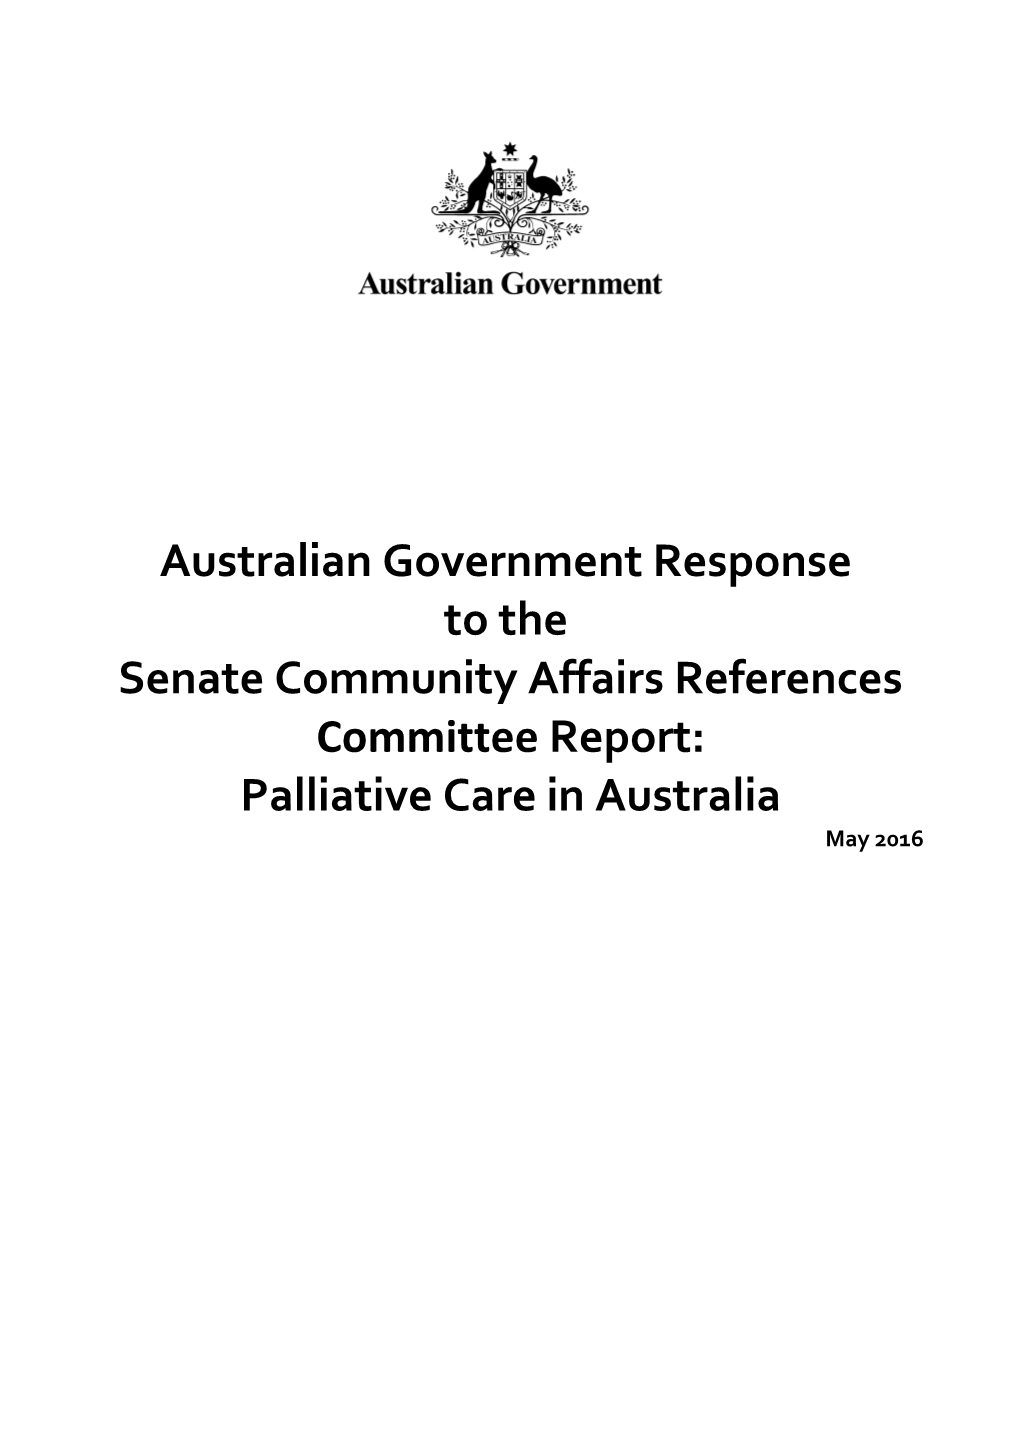 Australian Government Response to the Senate Community Affairs References Committee Report